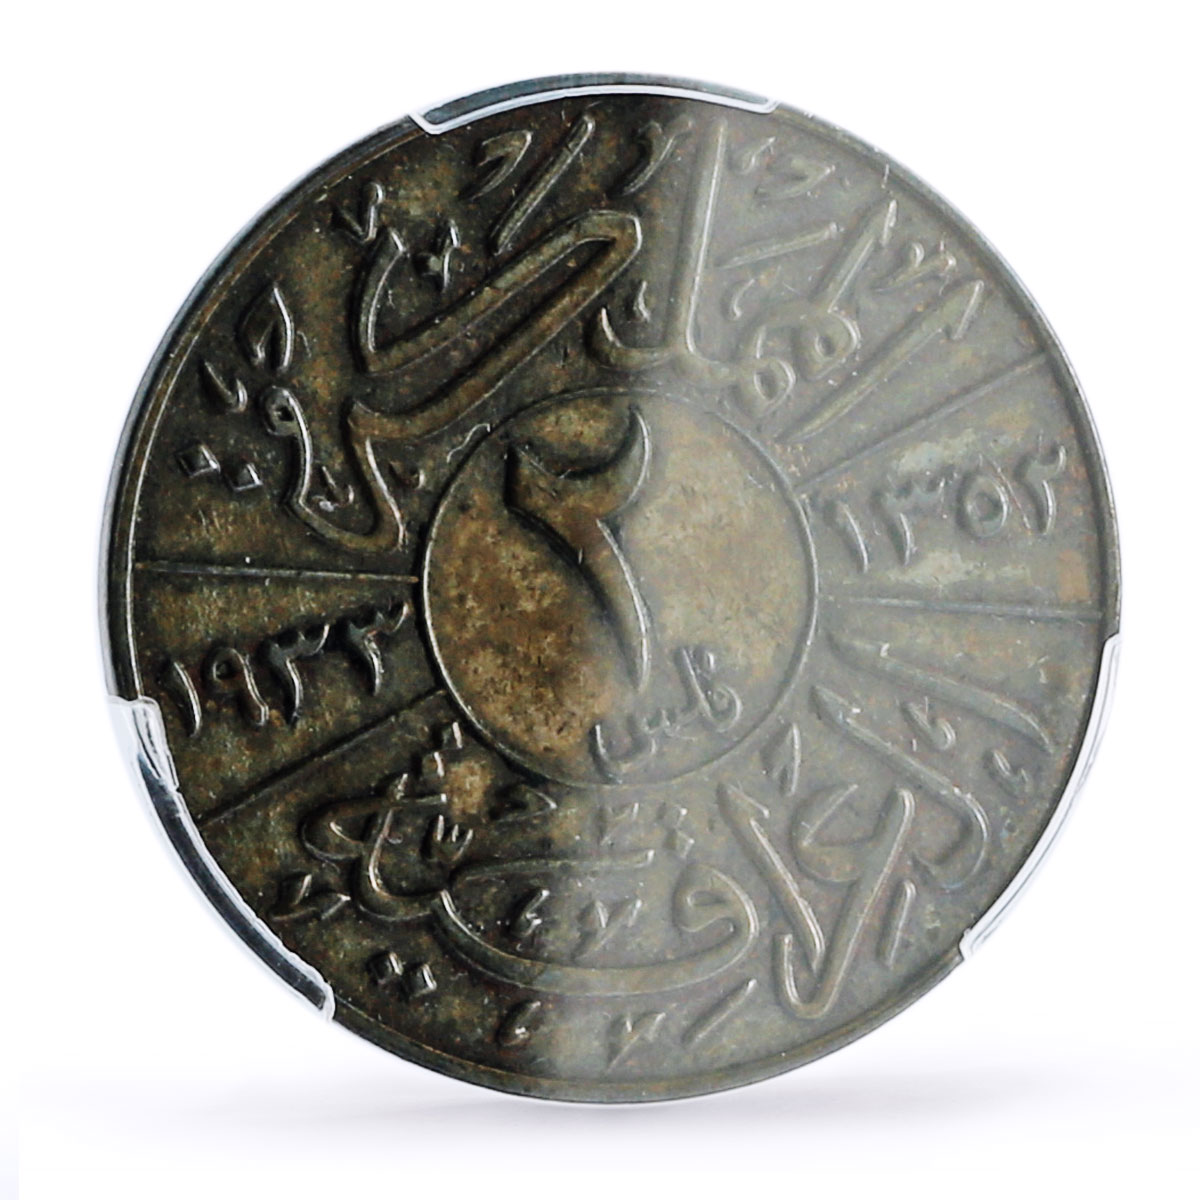 Iraq 2 fils Faisal I Coinage Coat of Arms KM-96 AU58 BN PCGS bronze coin 1933